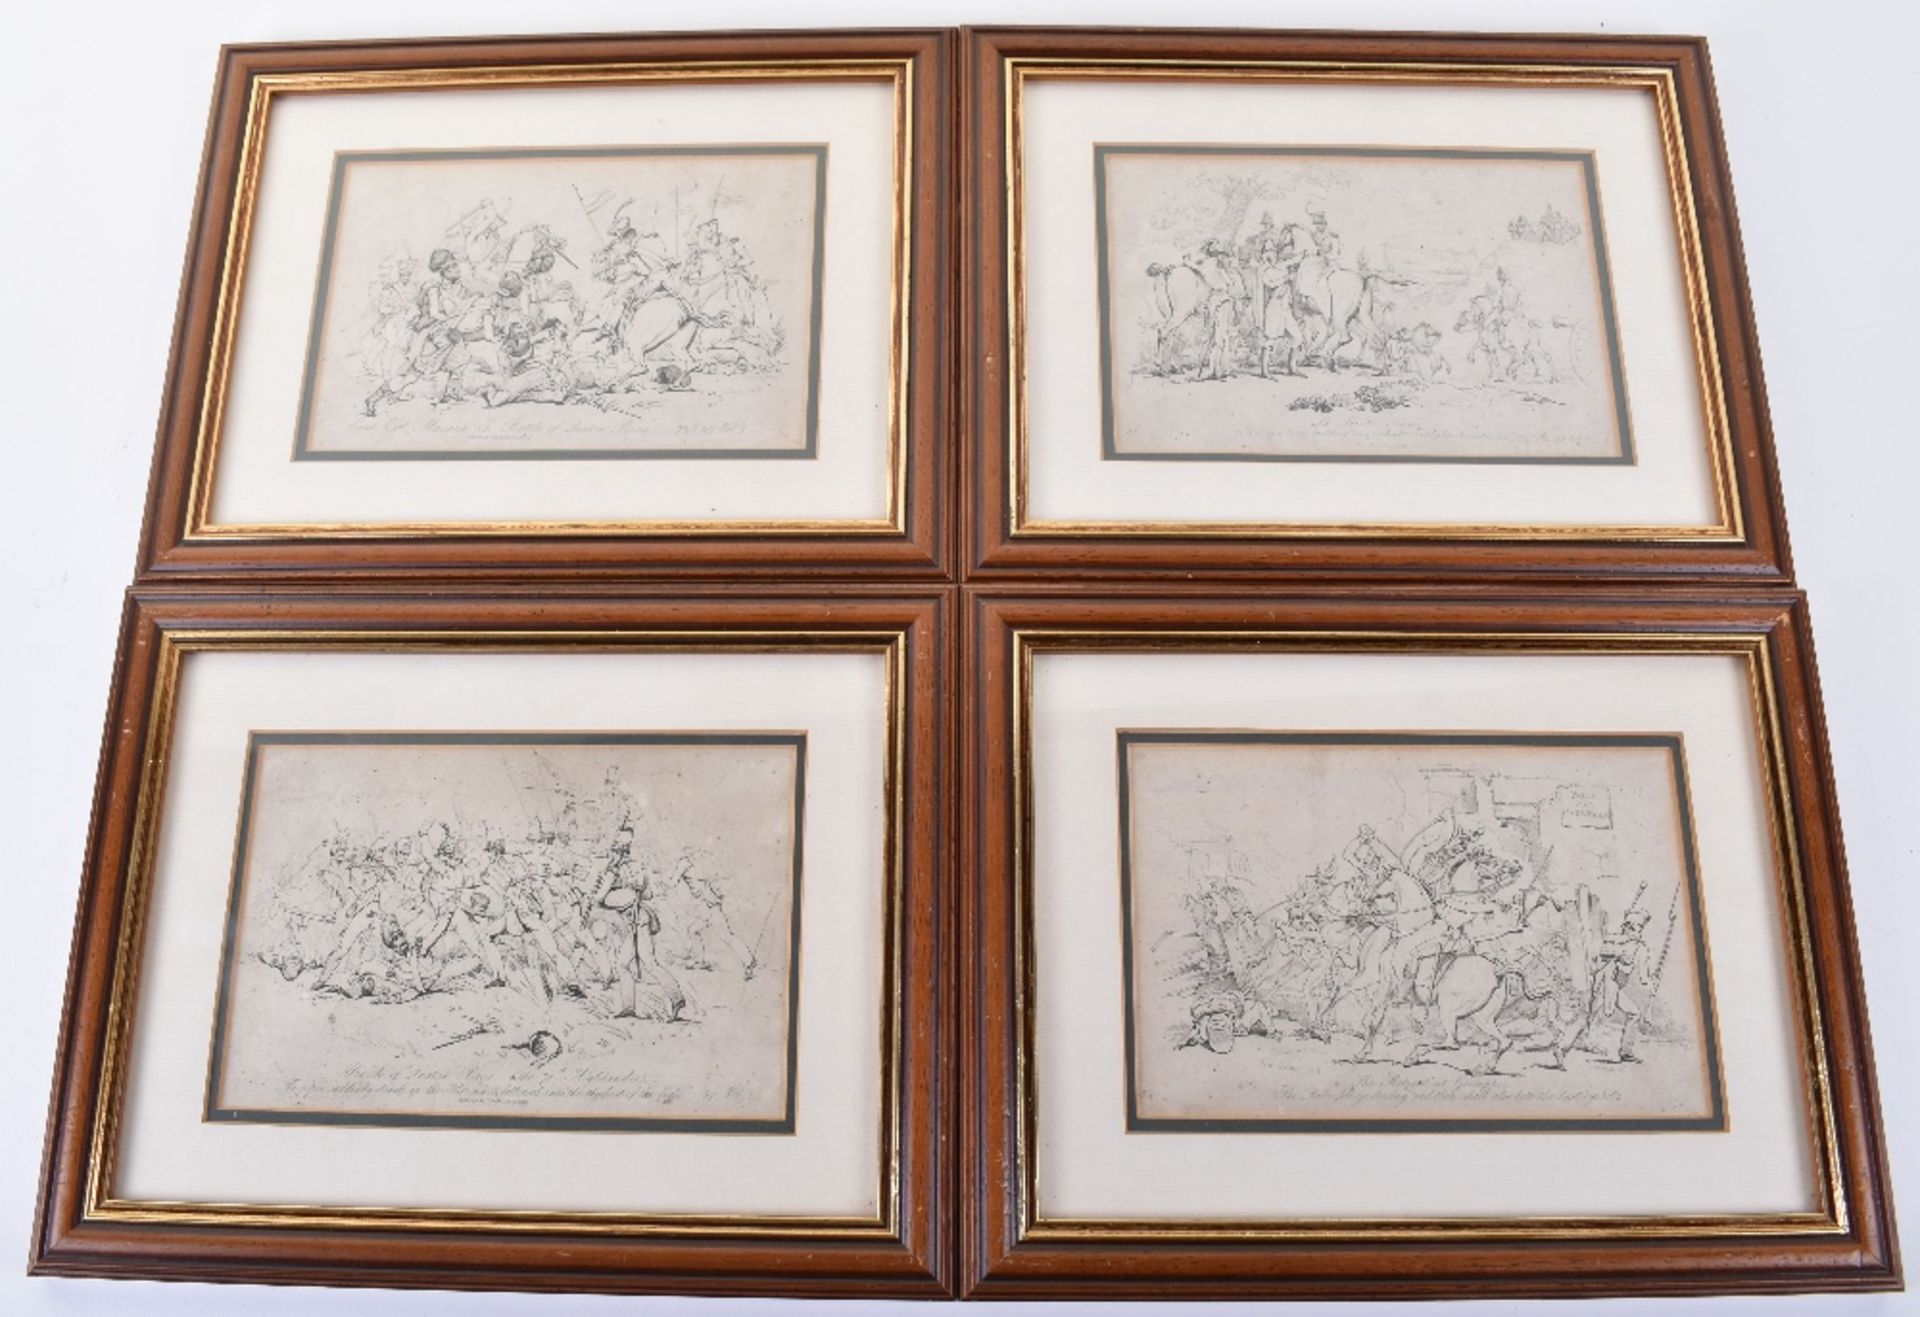 4x Framed and Glazed Etched Plates Battle of Waterloo Interest,